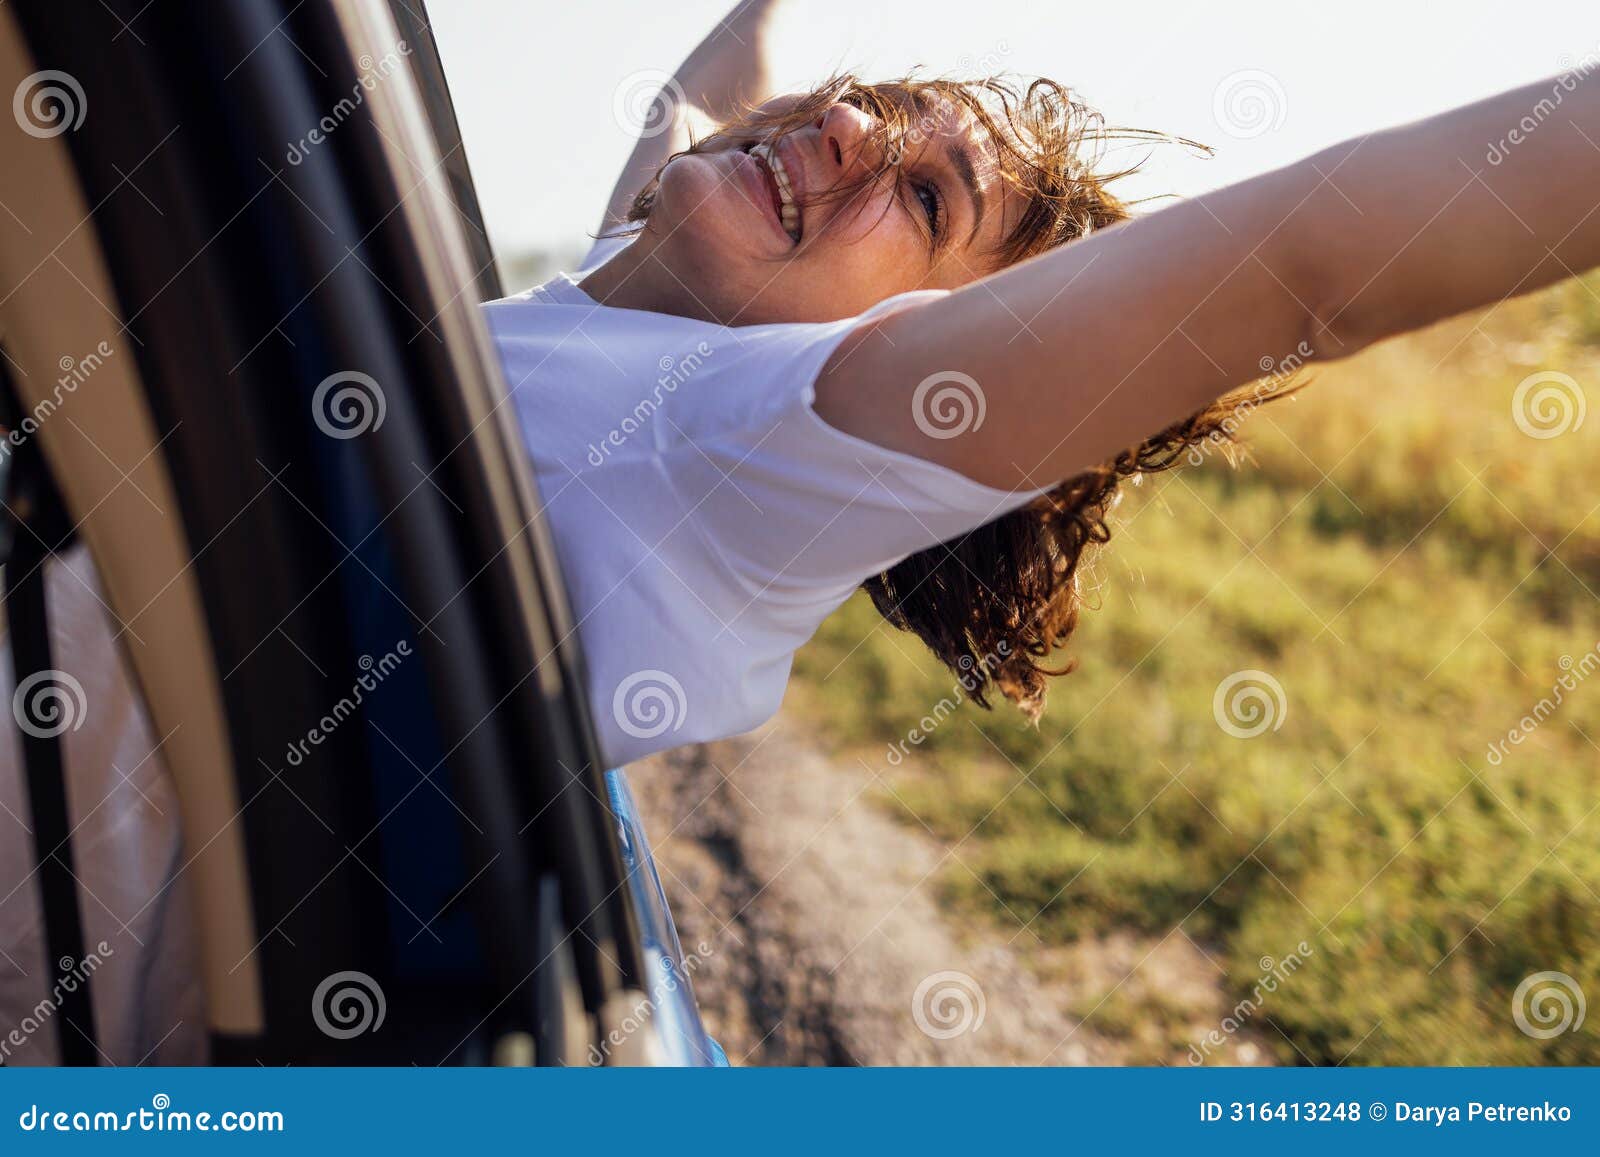 young woman leans out of car window and laughs. smiling girl travels and has fun on road